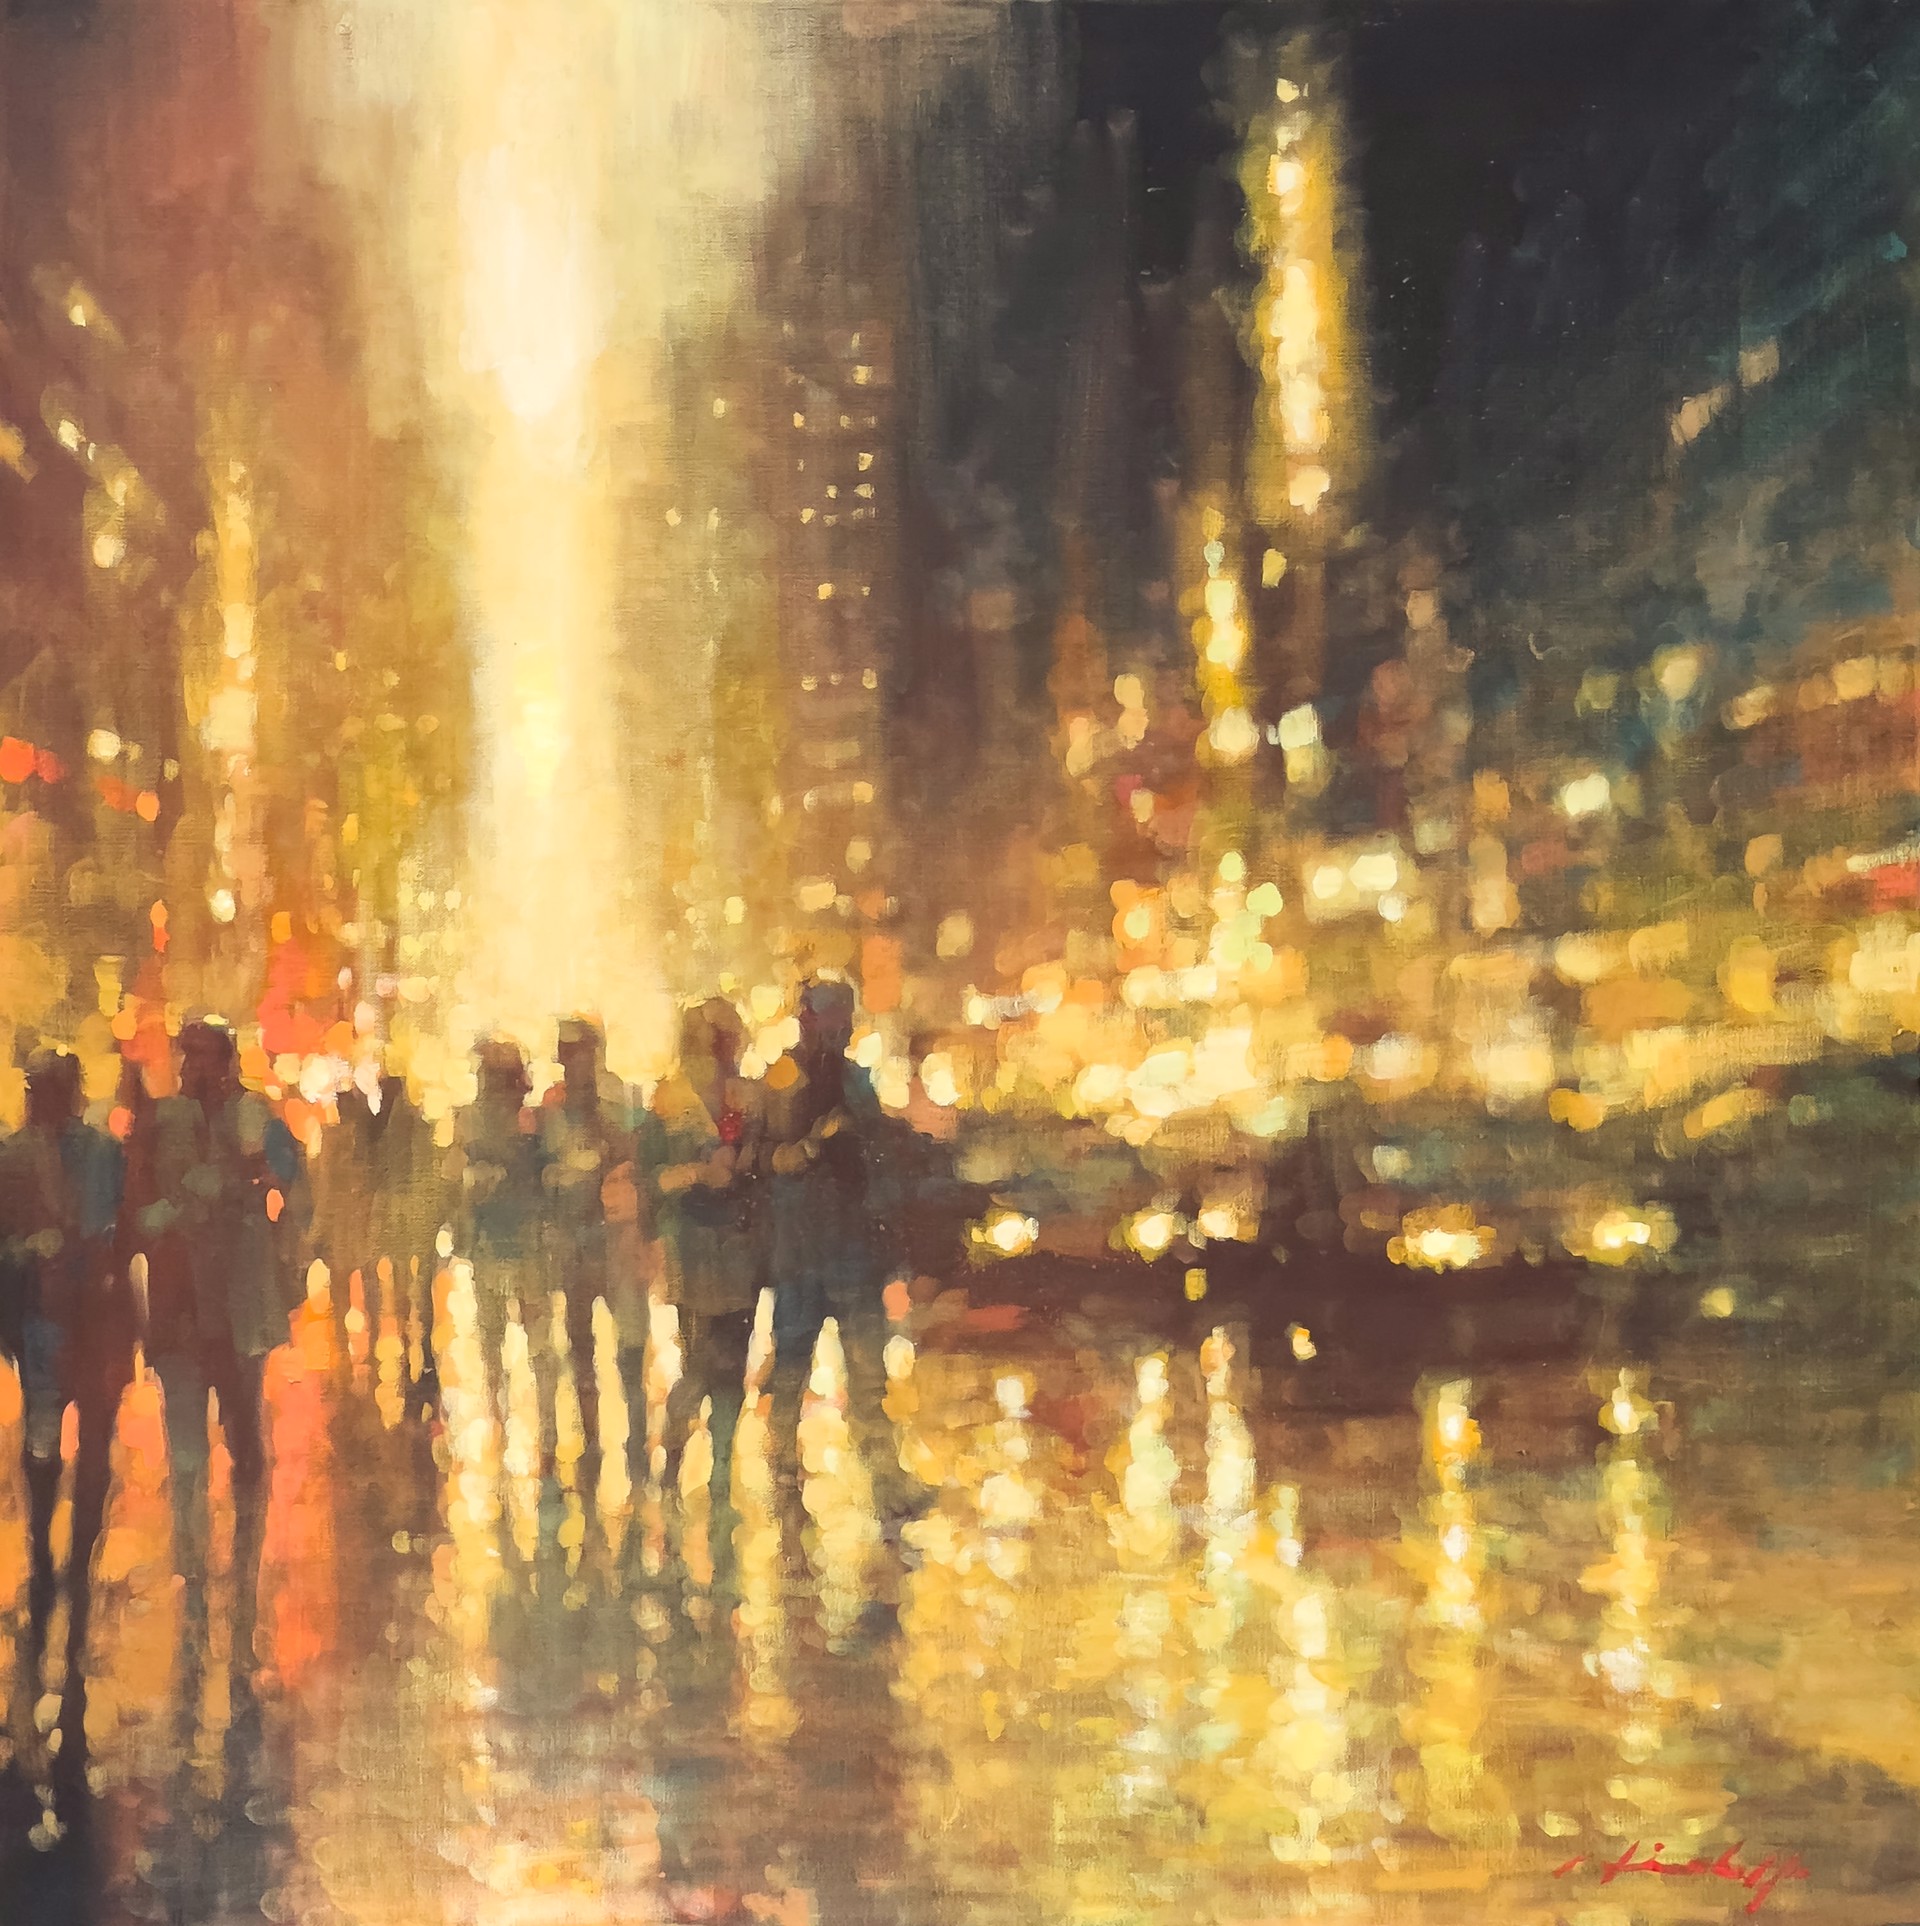 Streets of Gold by David Hinchliffe